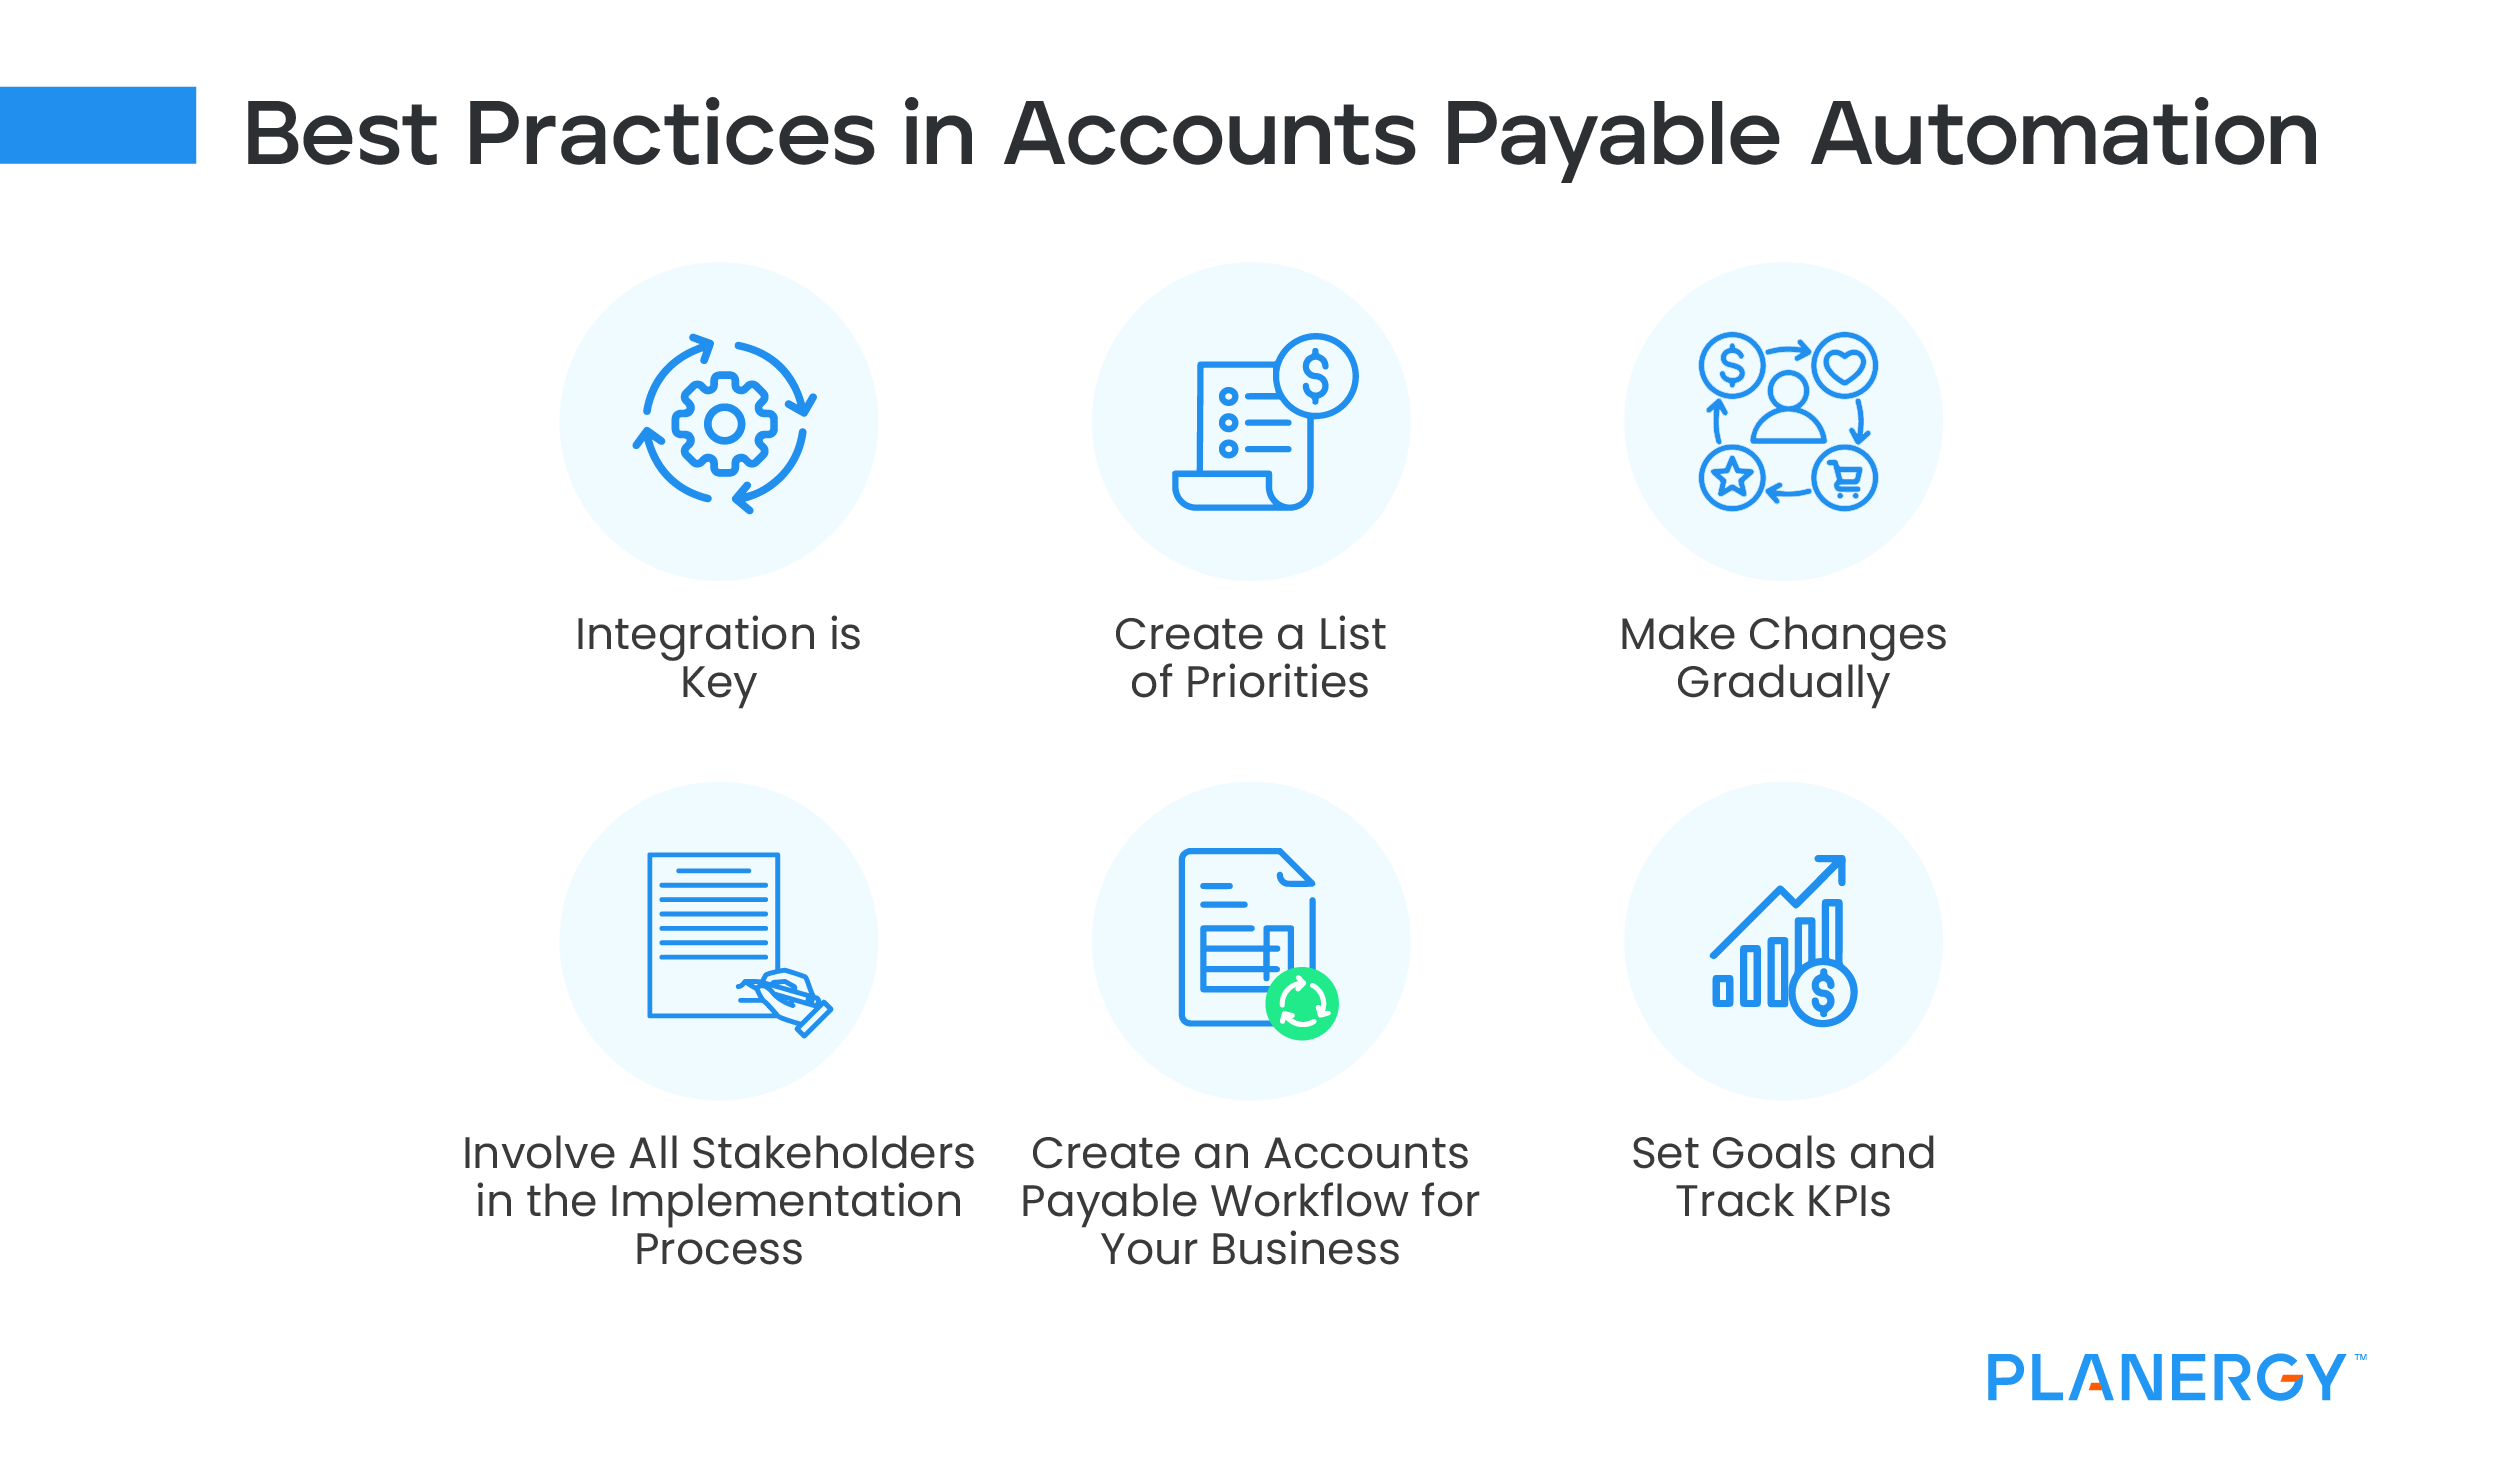 Best Practices in Accounts Payable Automation